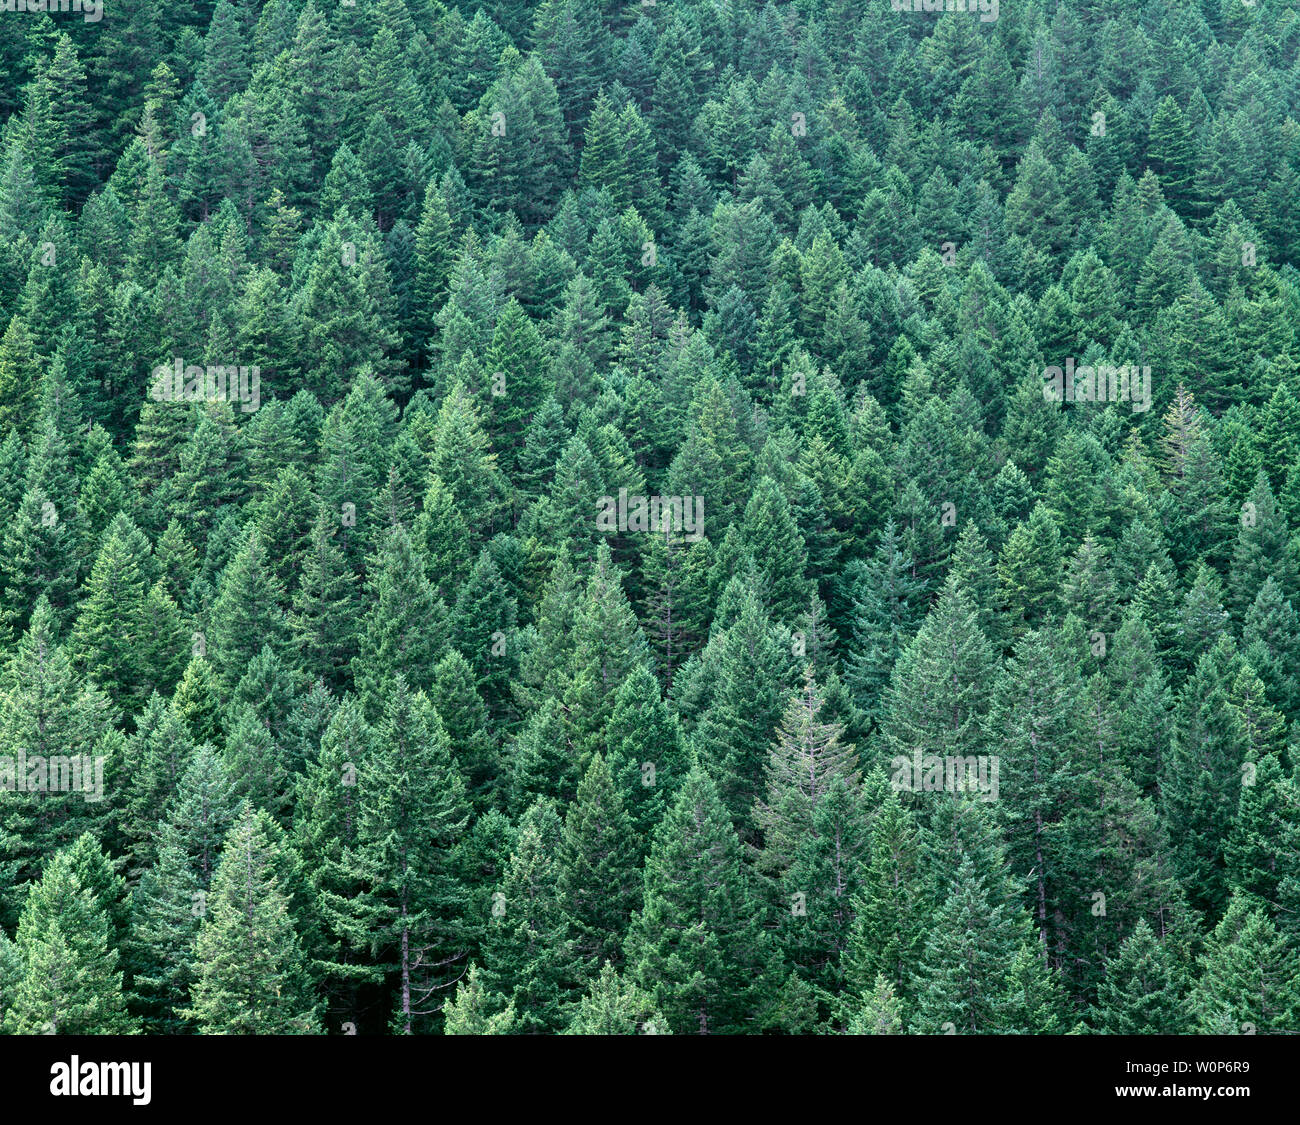 USA, Washington, Olympic National Forest, Old growth conifers forest comprised primarily of Douglas fir from the drier east side of Olympic Peninsula. Stock Photo